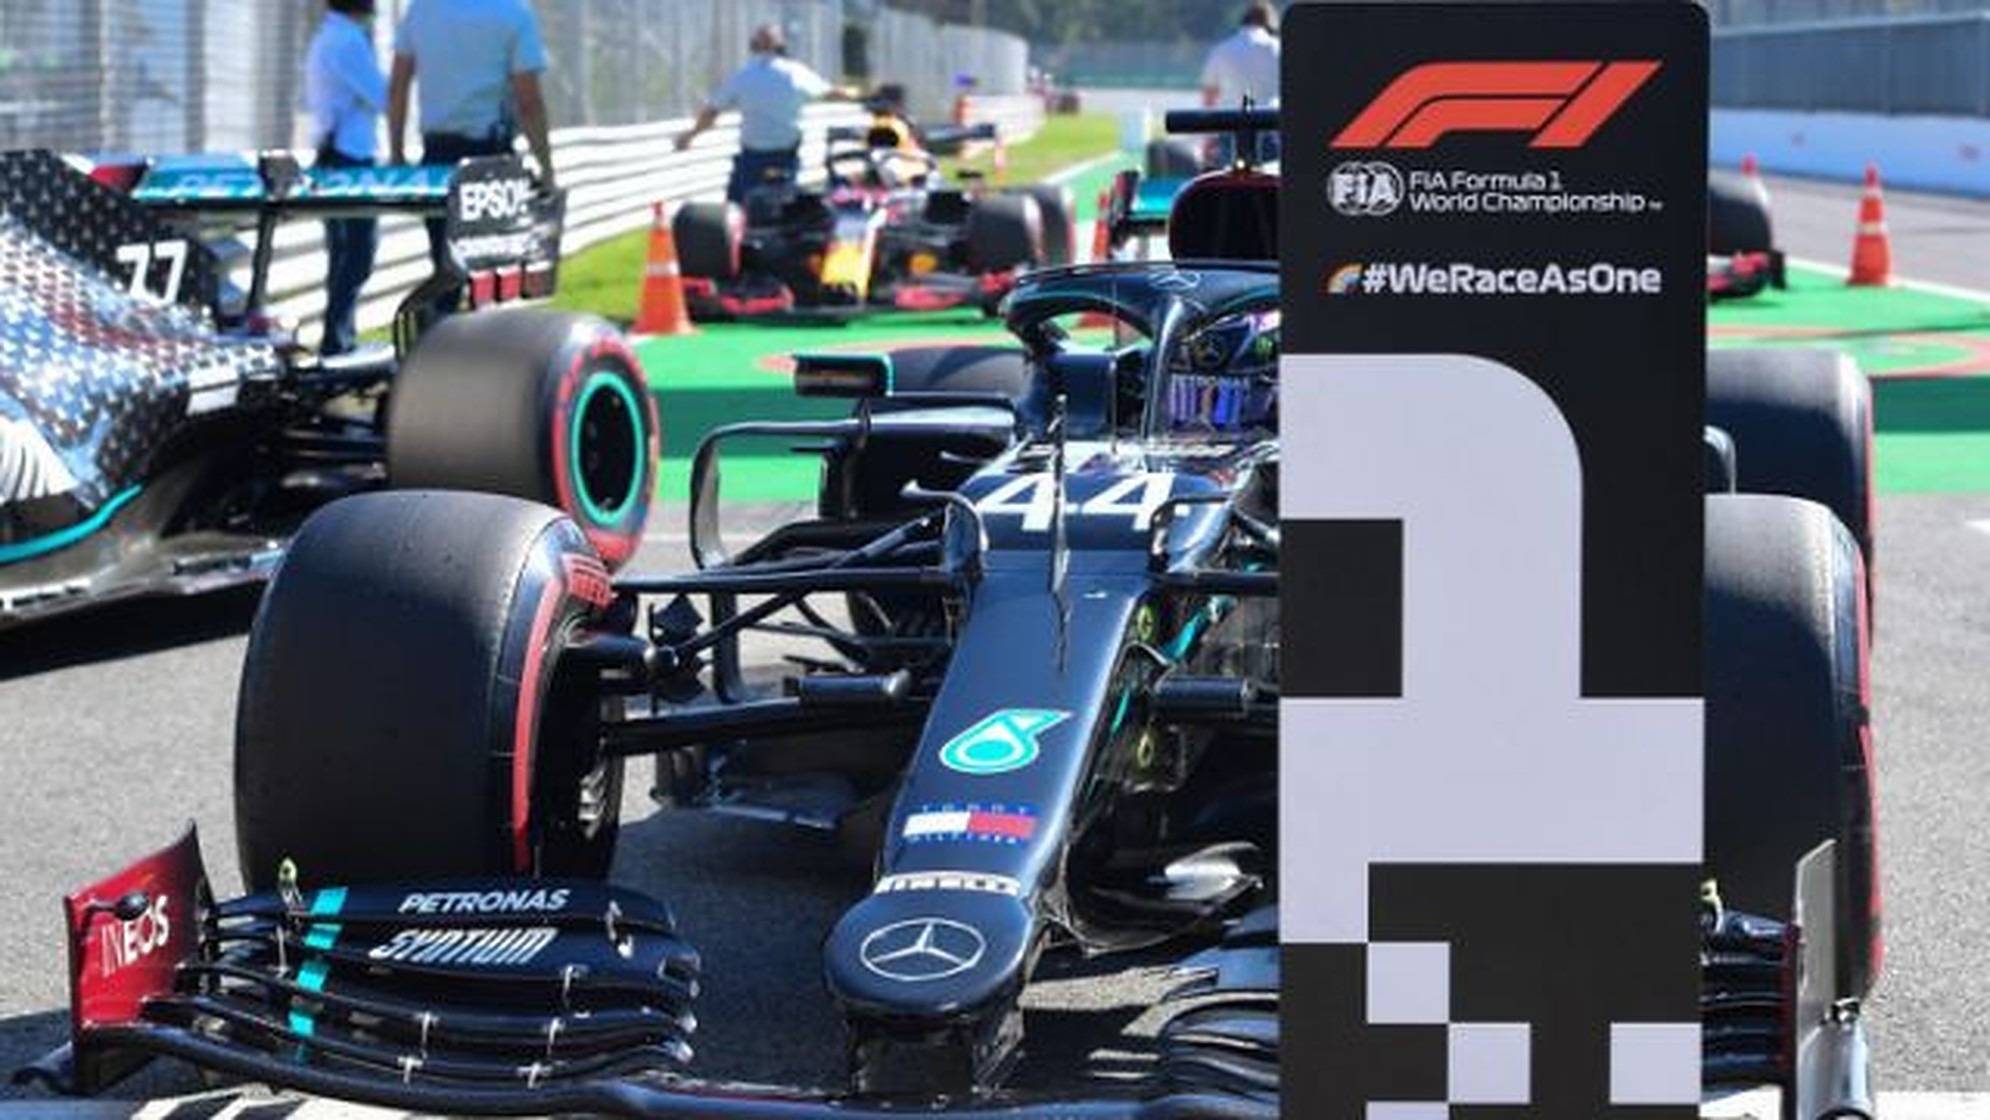 F1 Qualifying Today – What Time Is Qualifying For The Next Grand Prix?